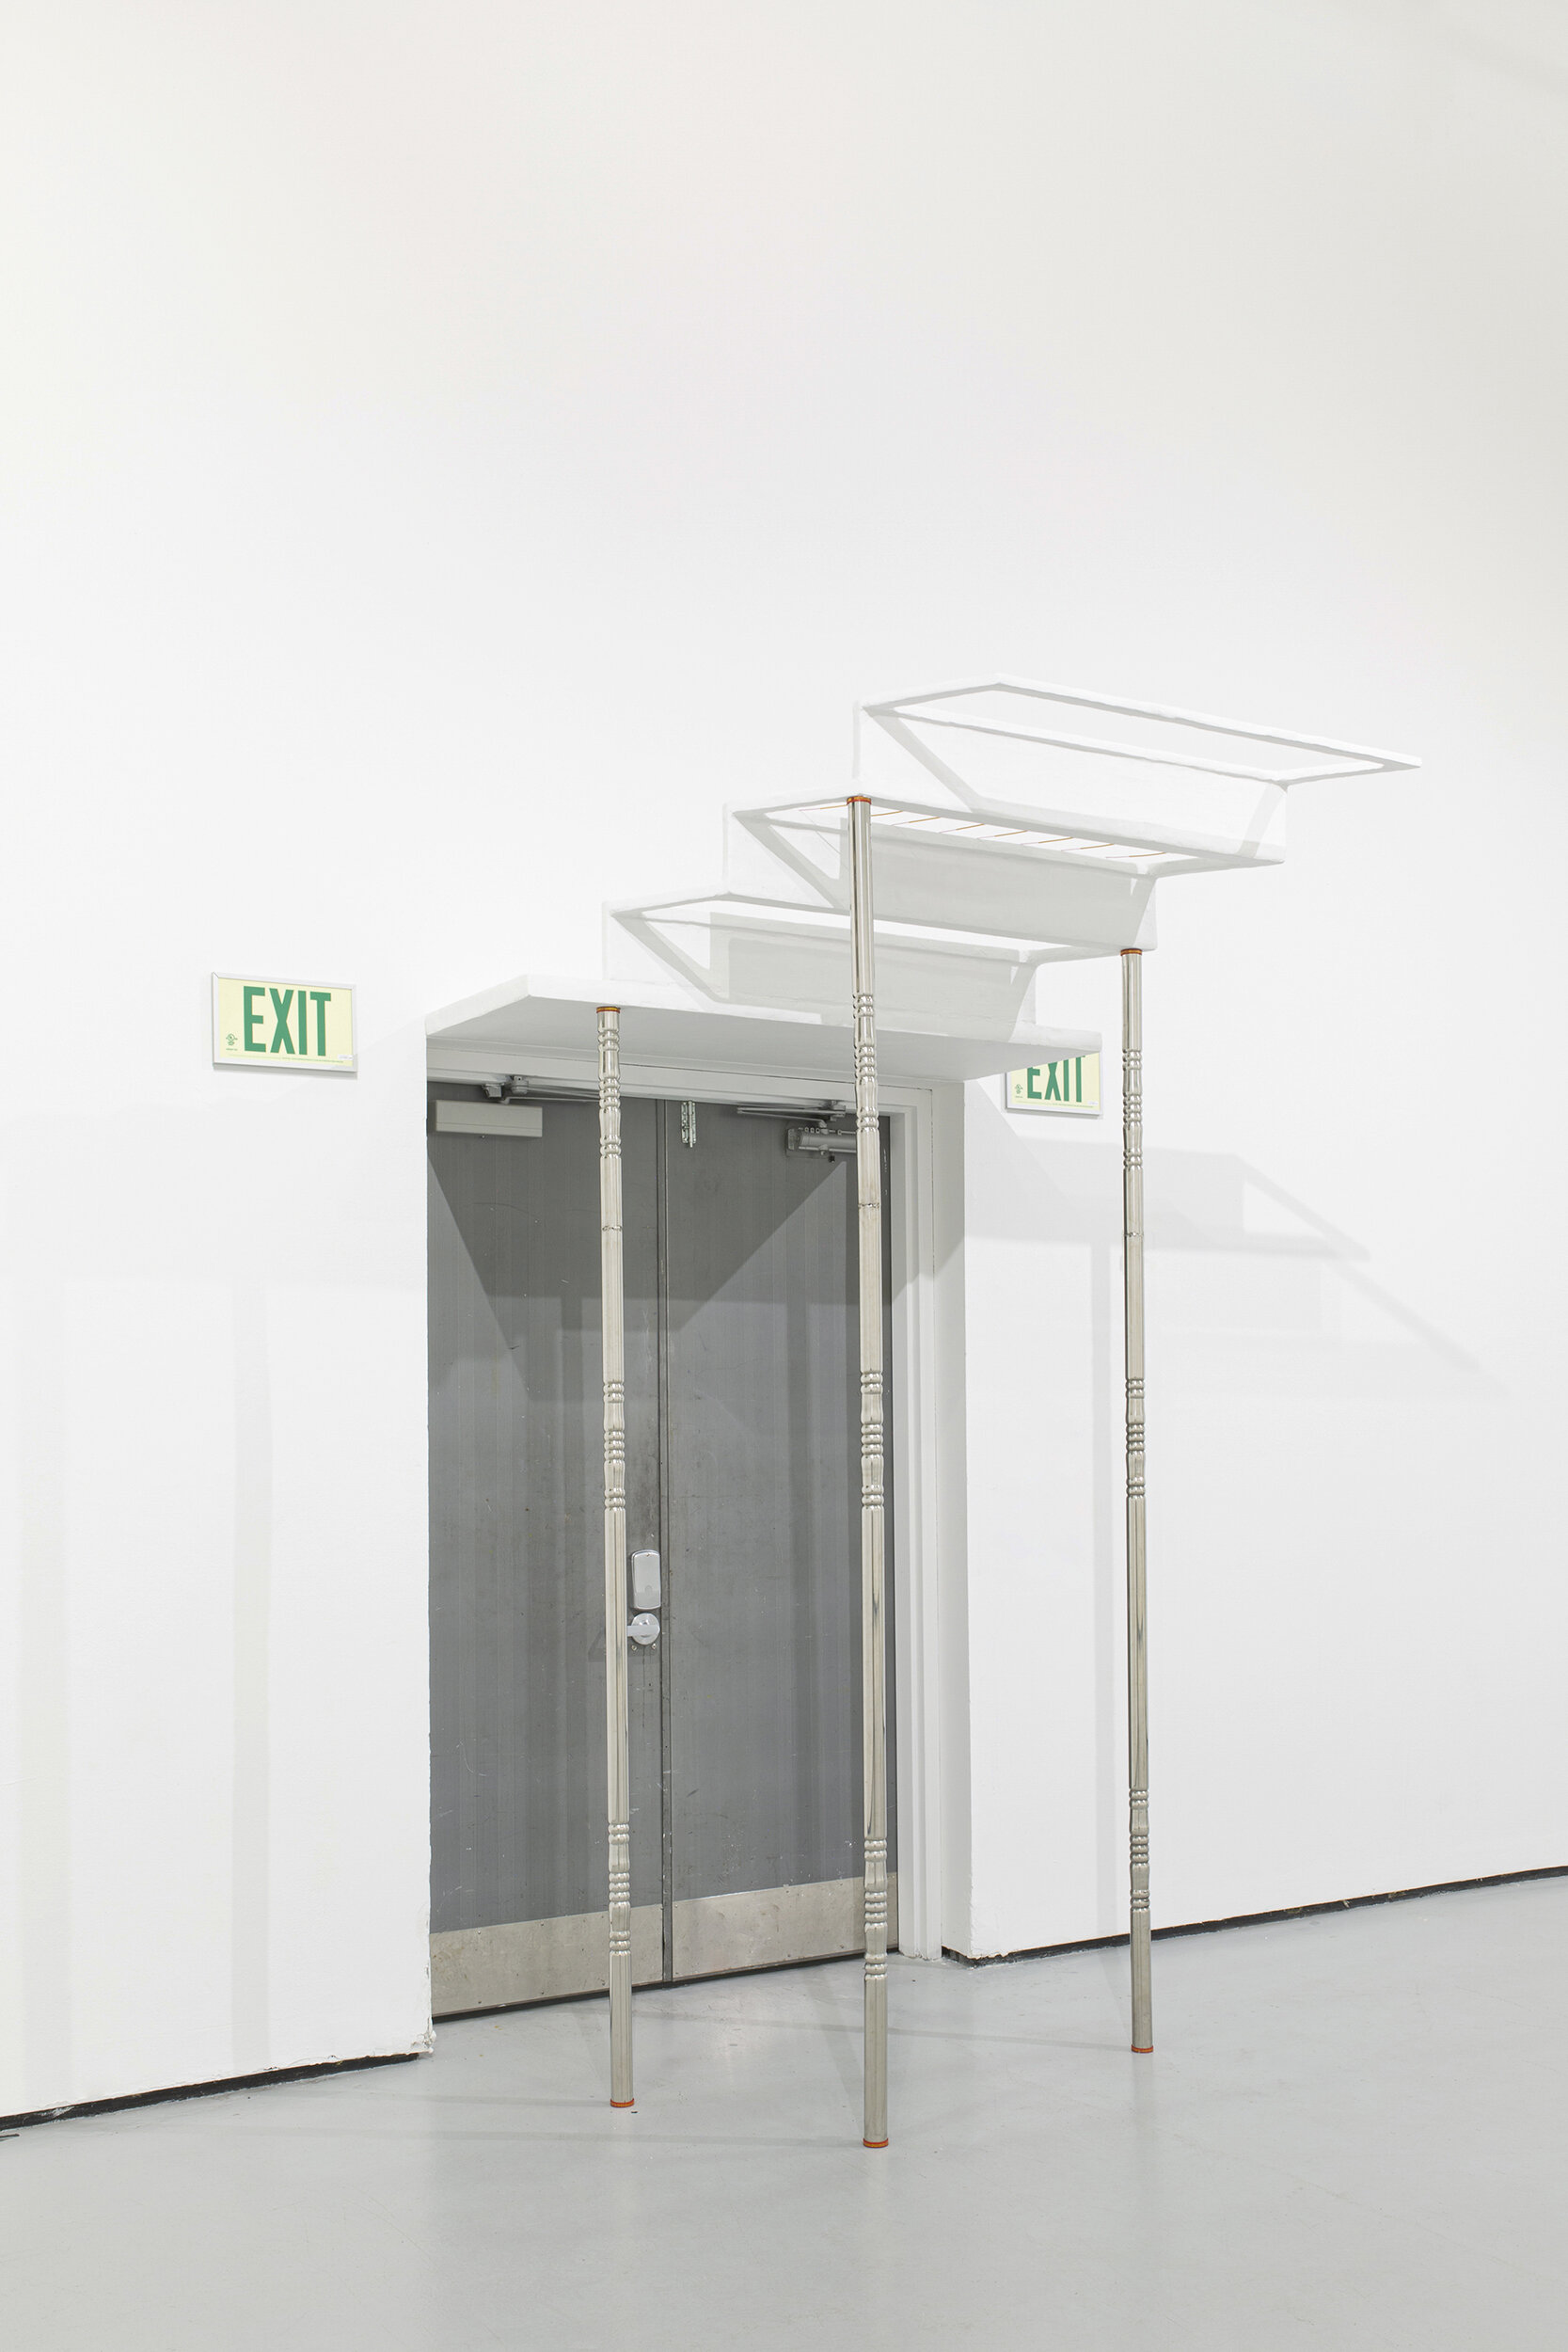  Anne Wu  Once Forgotten, Twice Remembered (Some Days the Line Is Taut) , 2020 Stainless steel, polystyrene, joint compound, plaster, paint, MyLand incense container caps, MyLand incense sticks, exit signs 120 x 60 x 48 inches (305 x 152 x 122 cm) ph